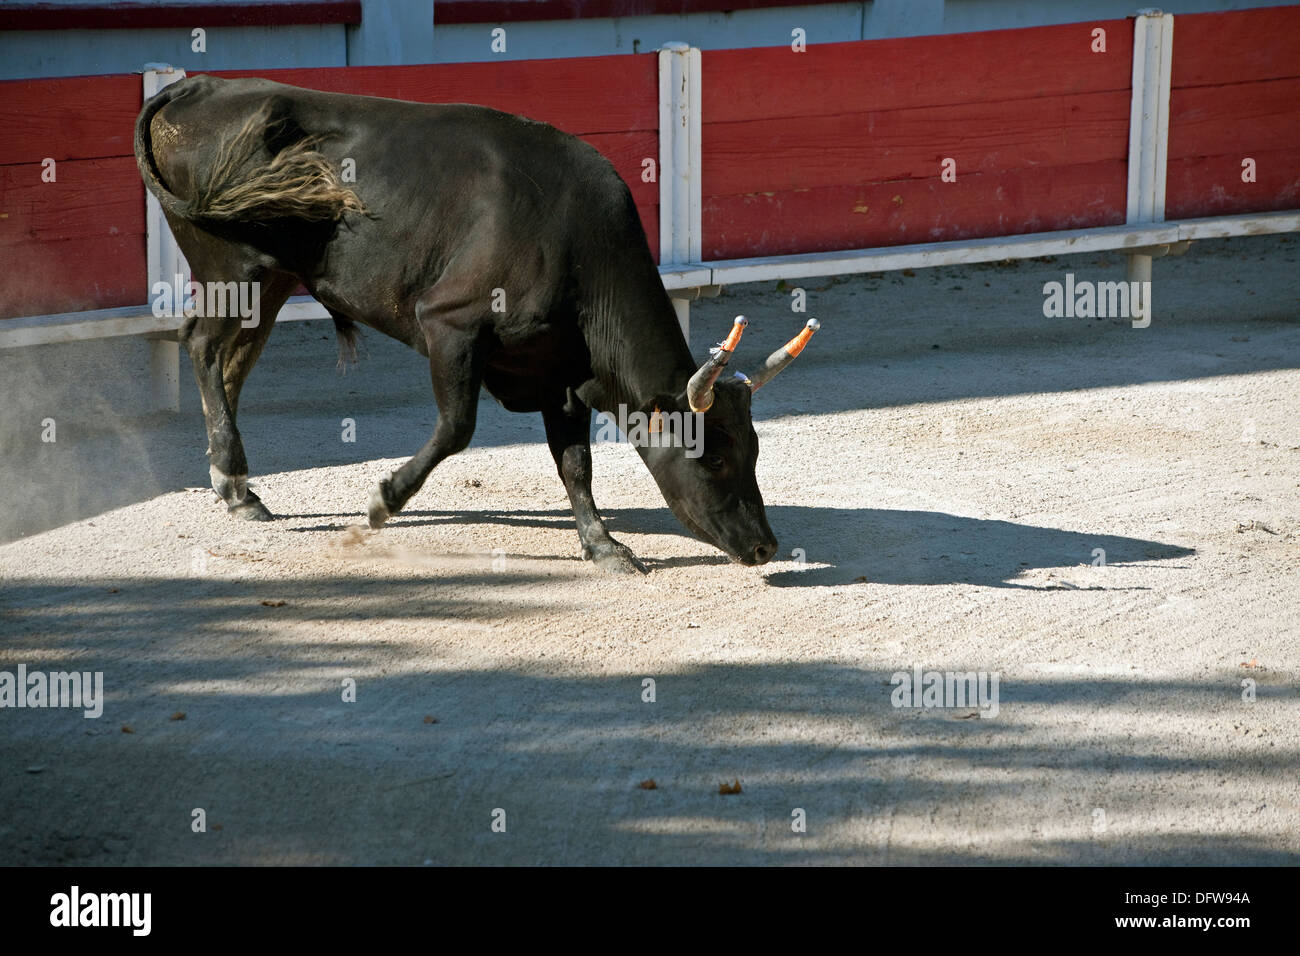 French bull fighting,Course Camarguaise,Bullfighting, Fontvieille France,Bull ready to  charge,  Pawing ground,David Collingwood Stock Photo